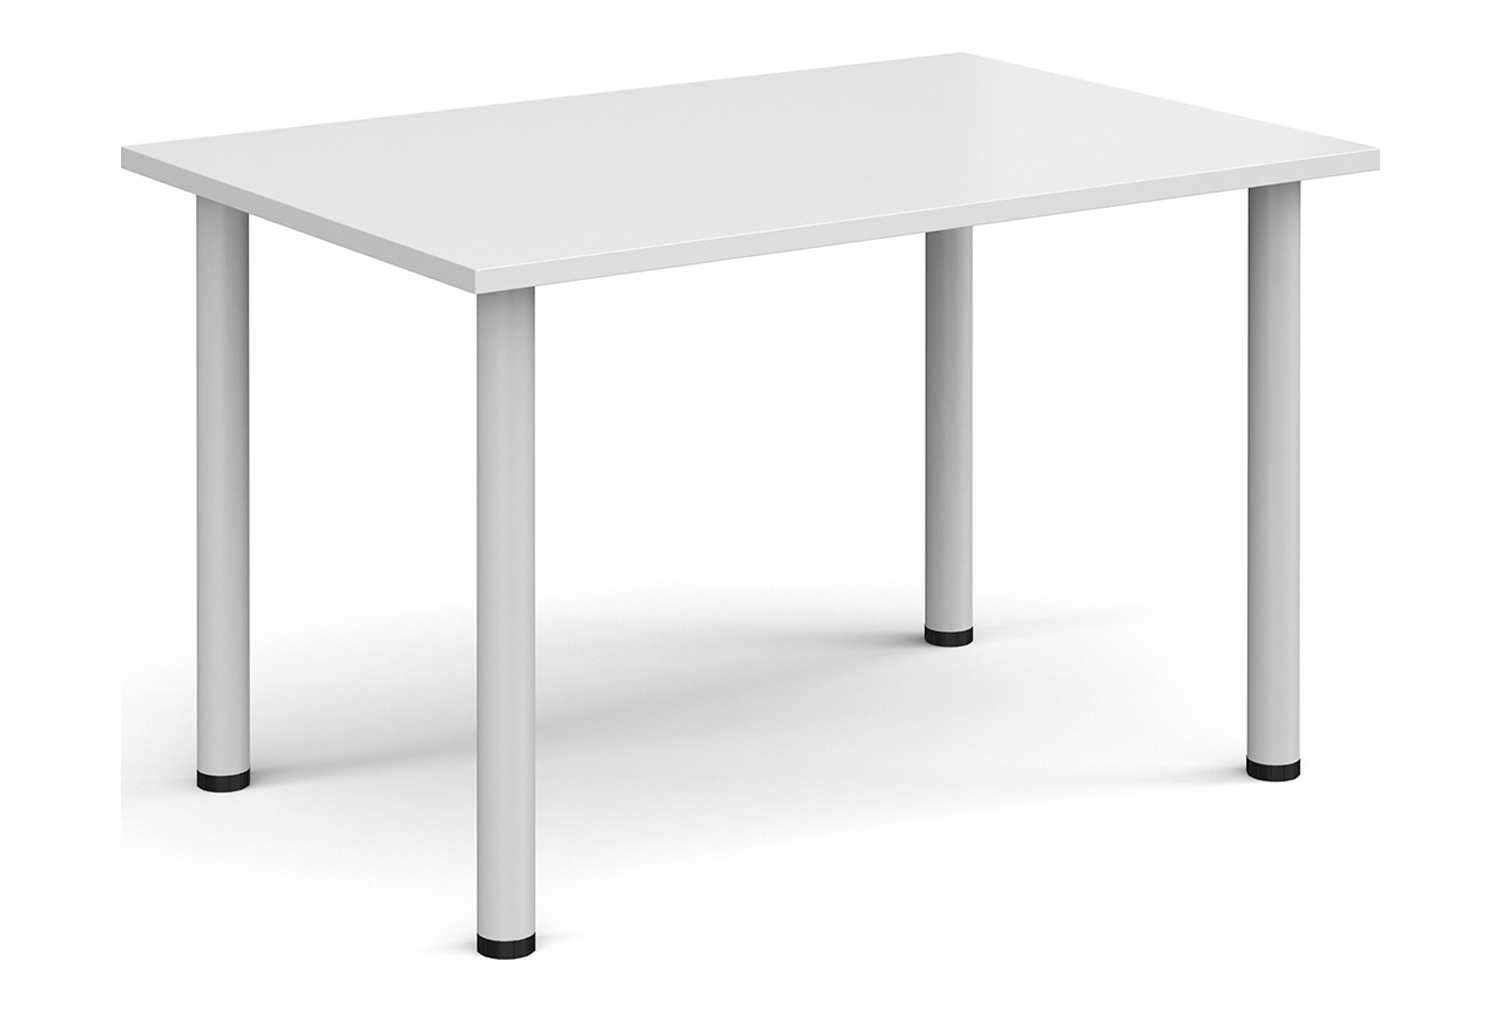 Abani Rectangular Meeting Table, 120wx80dx73h (cm), White, Express Delivery